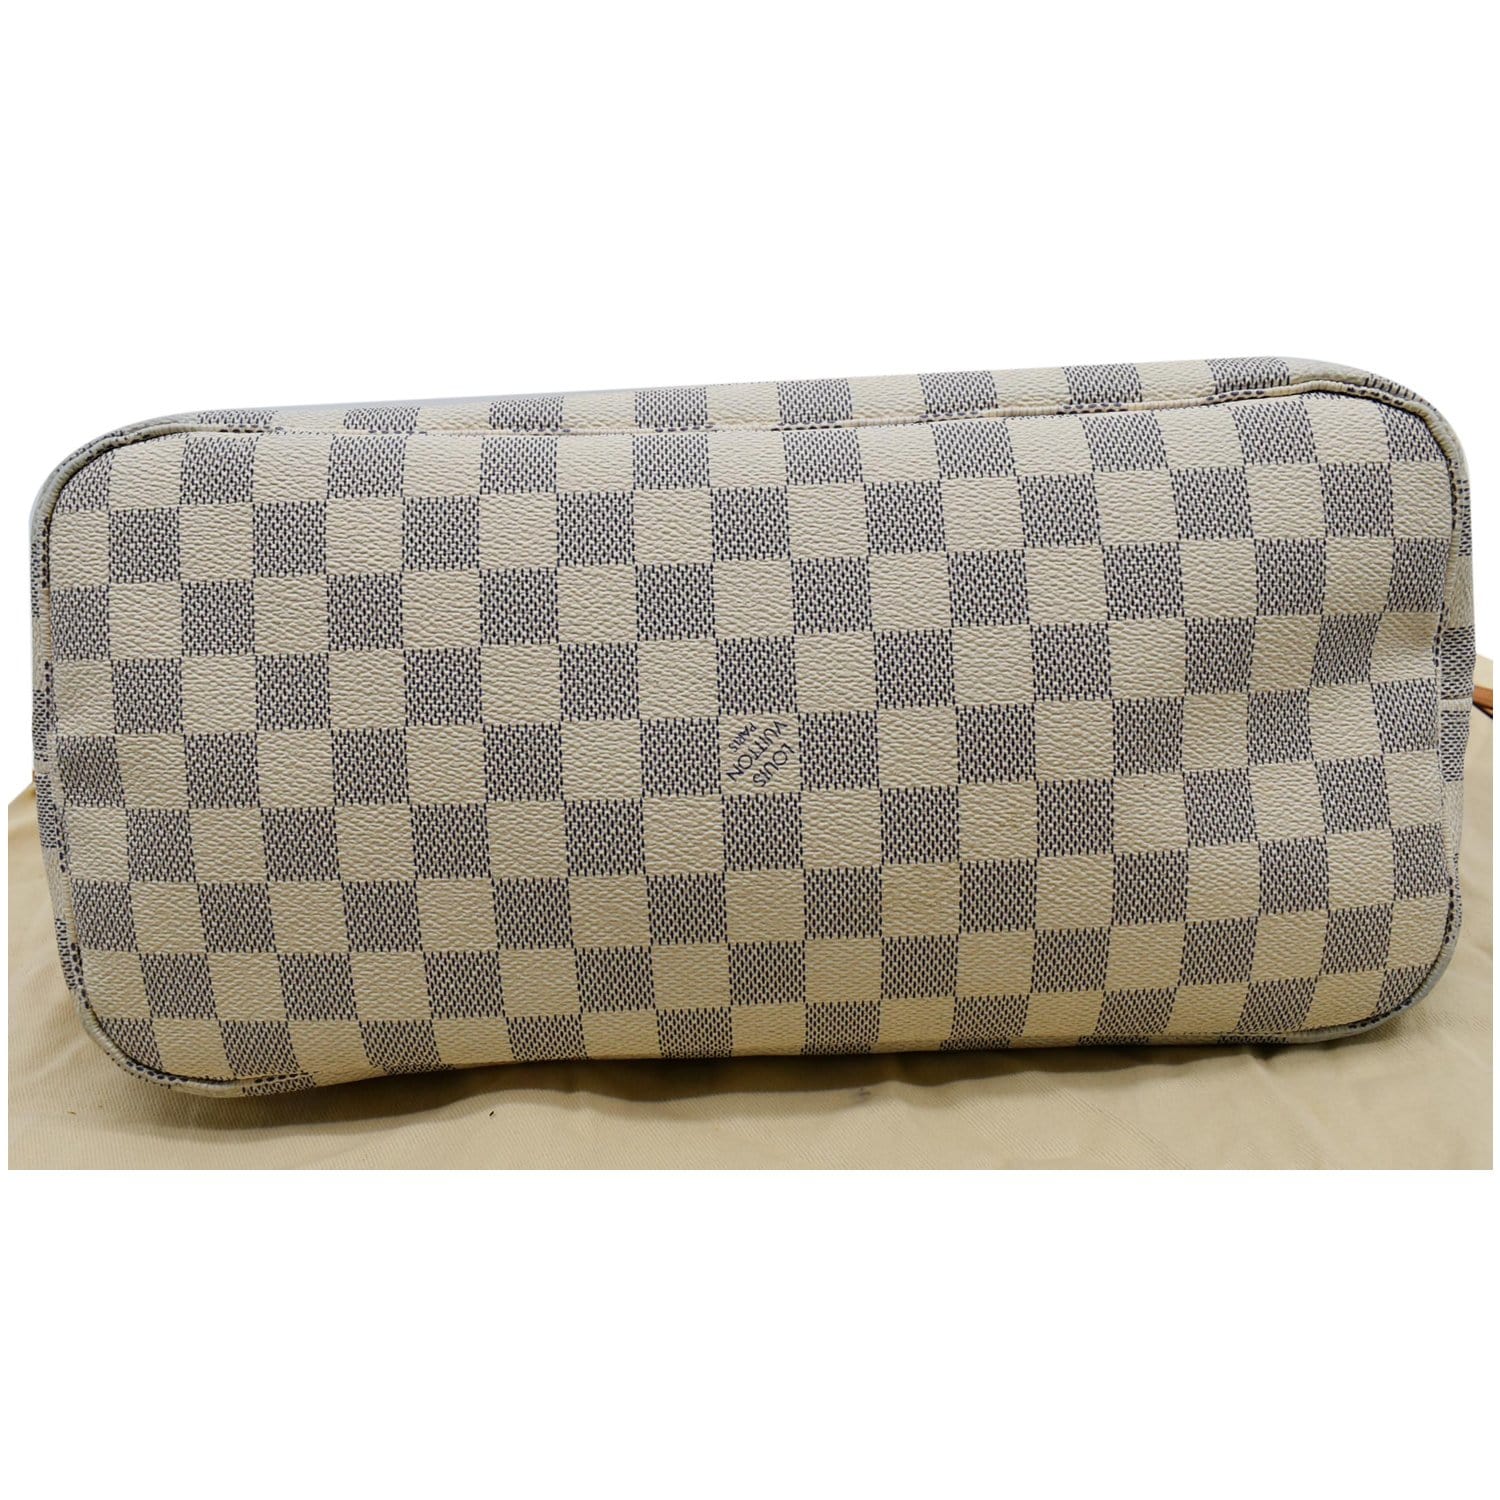 🔥NEW LOUIS VUITTON Neverfull MM Tote Bag Damier Azur Beige ❤️ HOT GIFT